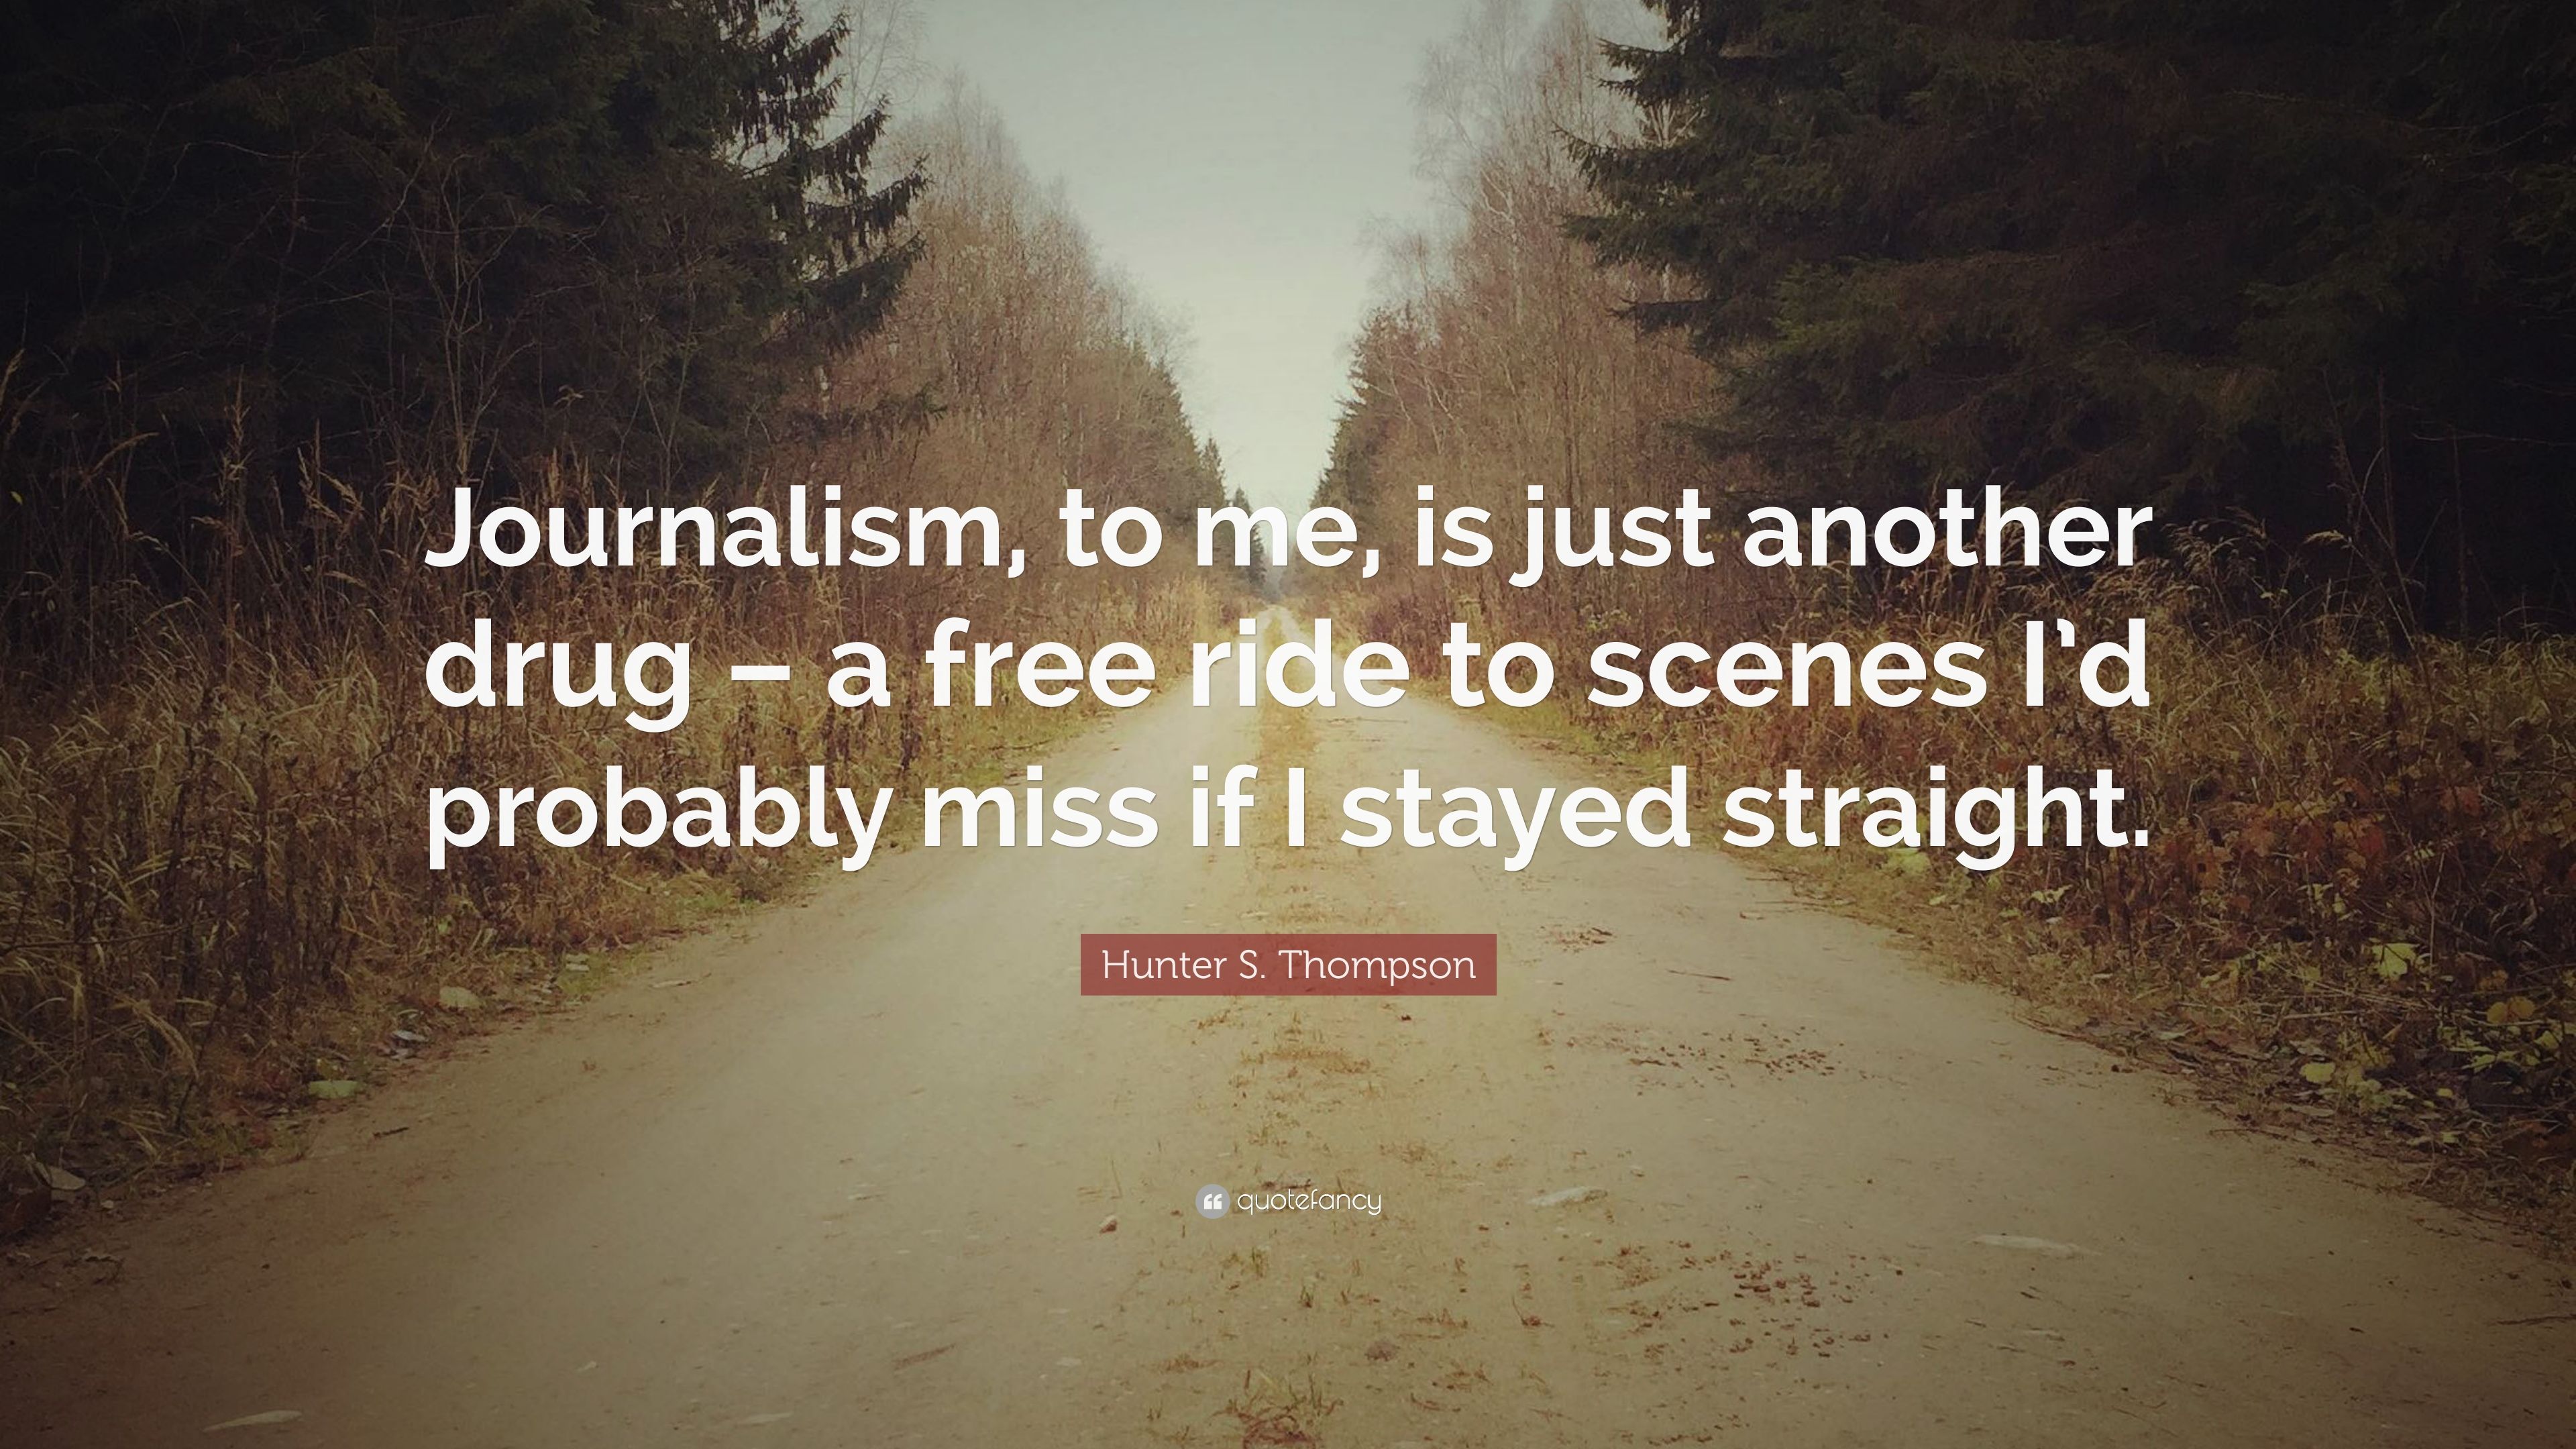 Hunter S. Thompson Quote: “Journalism, to me, is just another drug